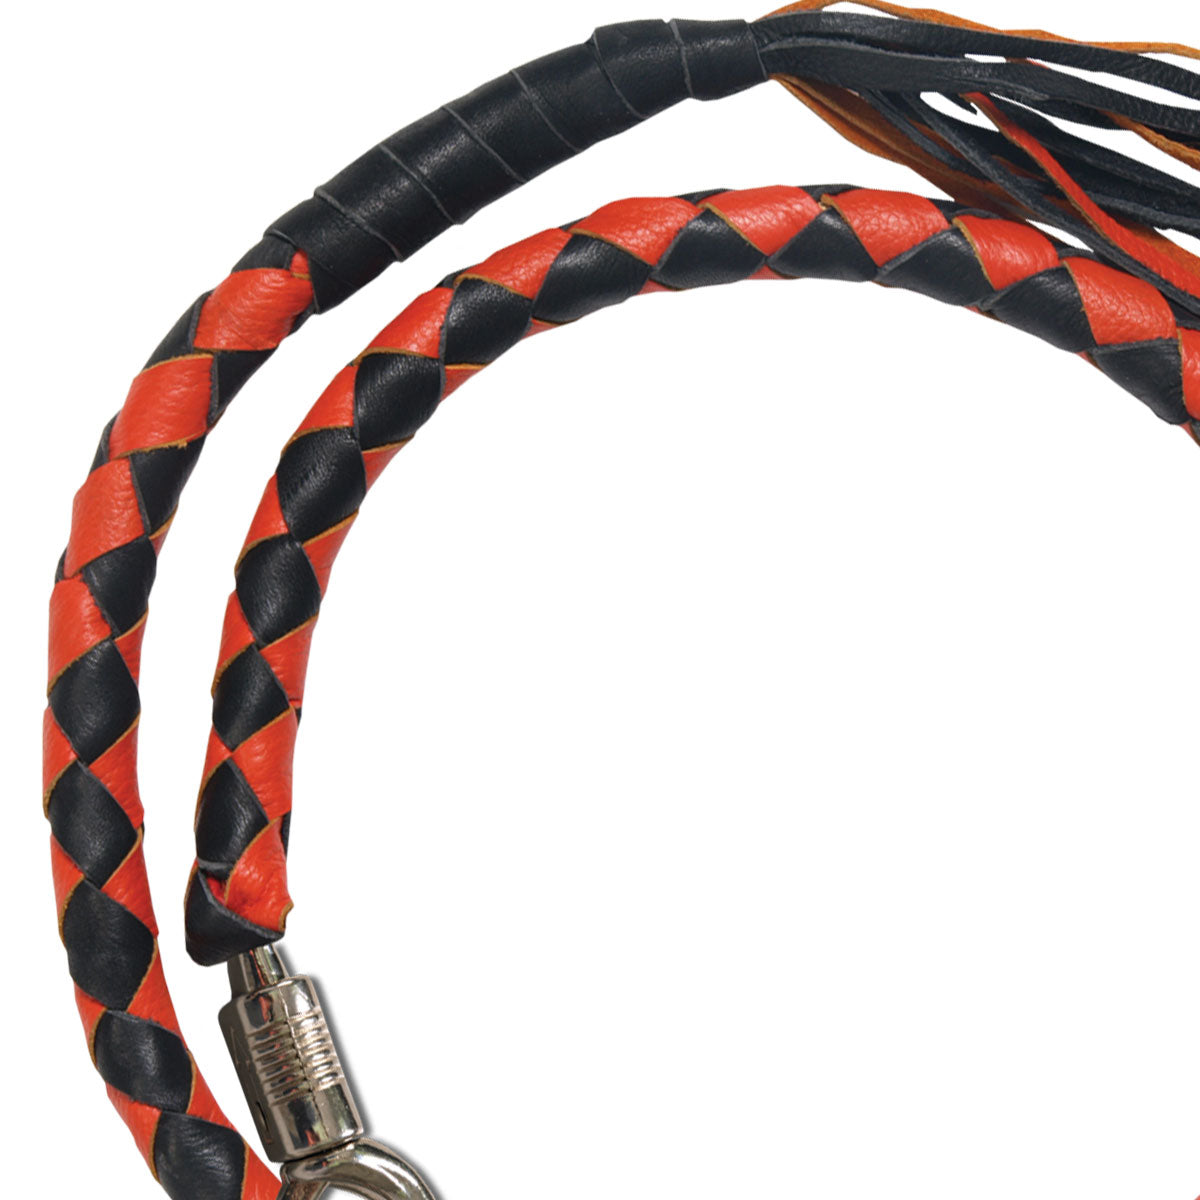 Hot Leathers MWH1104 ‘Get Back’ Genuine Black and Orange Leather Whip